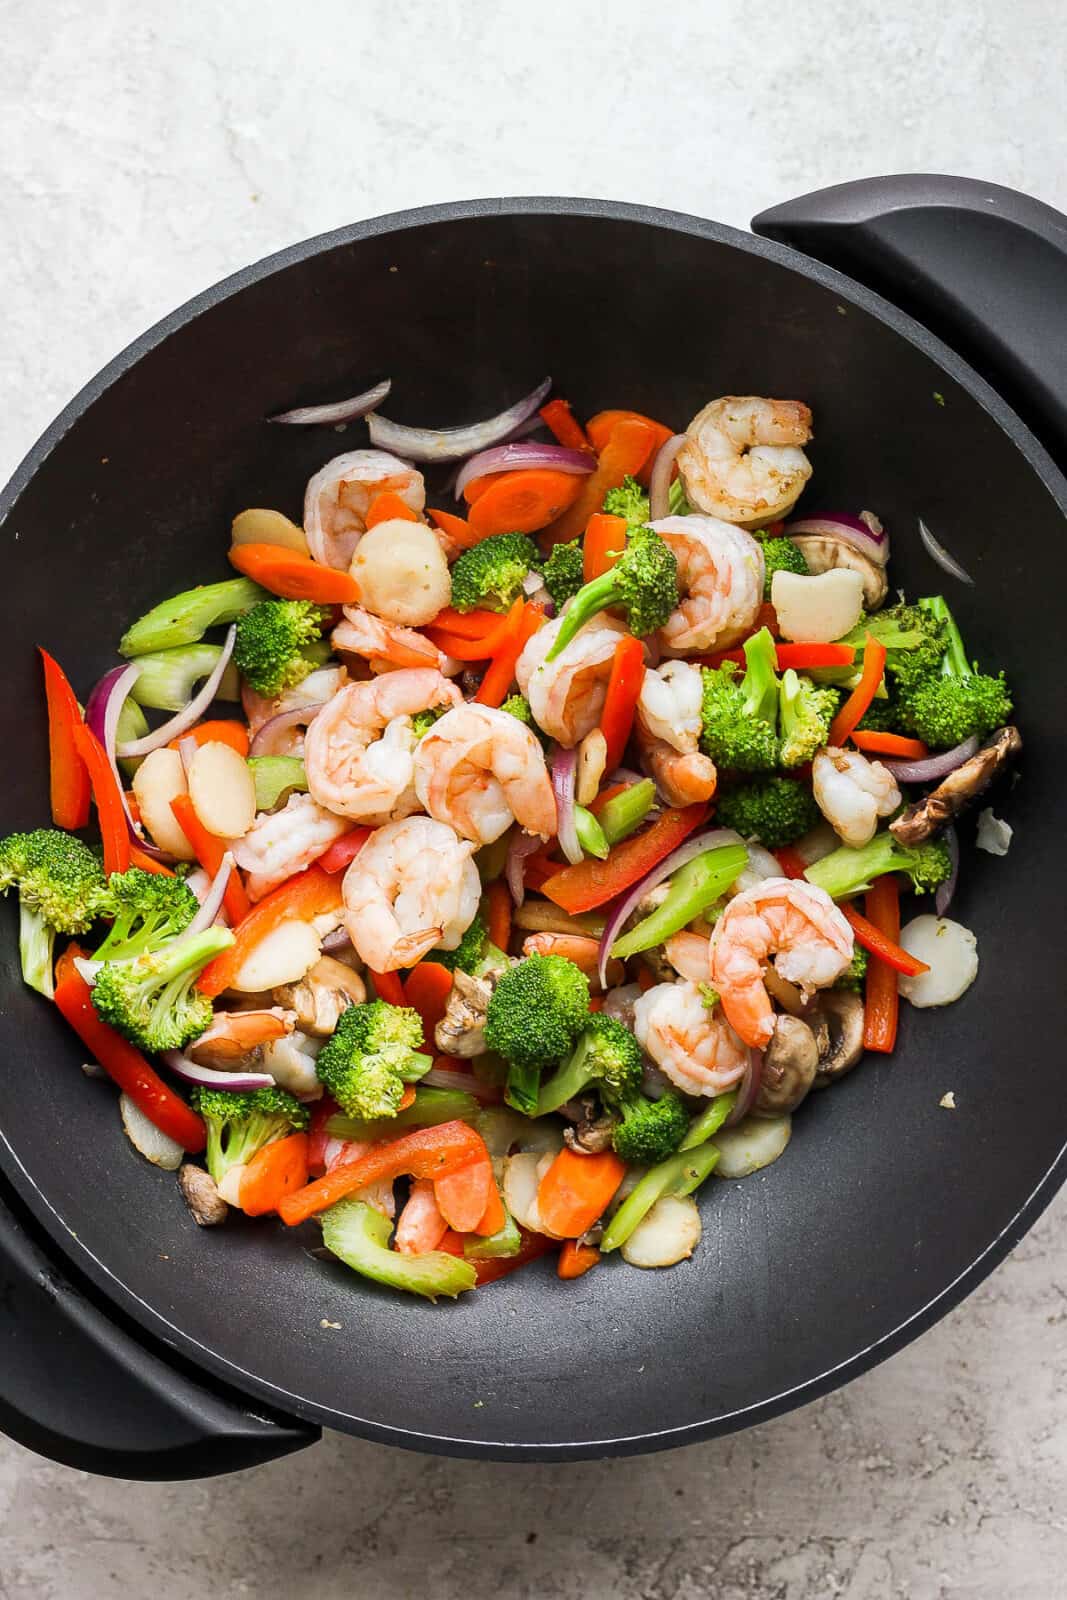 The shrimp stir fry in the wok before adding the sauce.